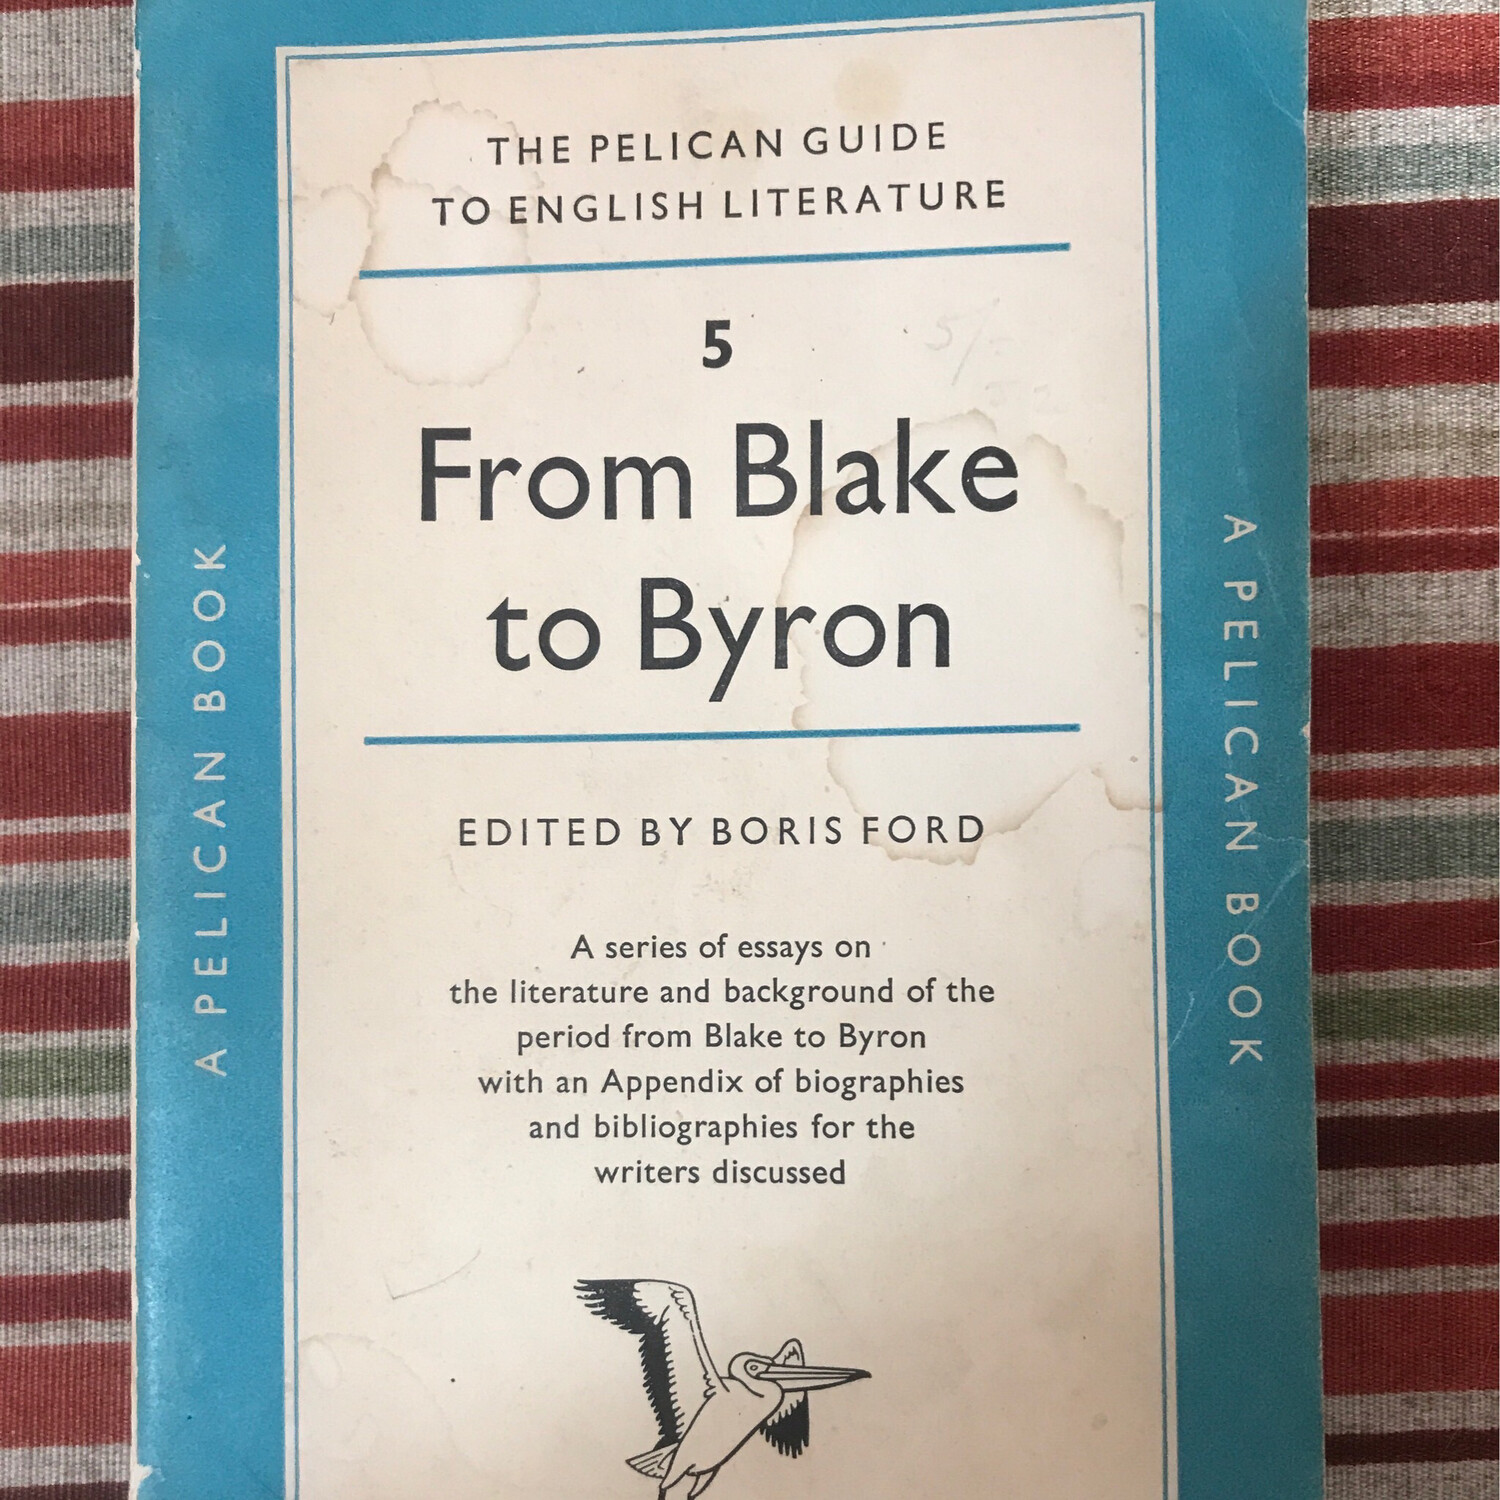 From Blake To Byron, Edited By Boris Ford